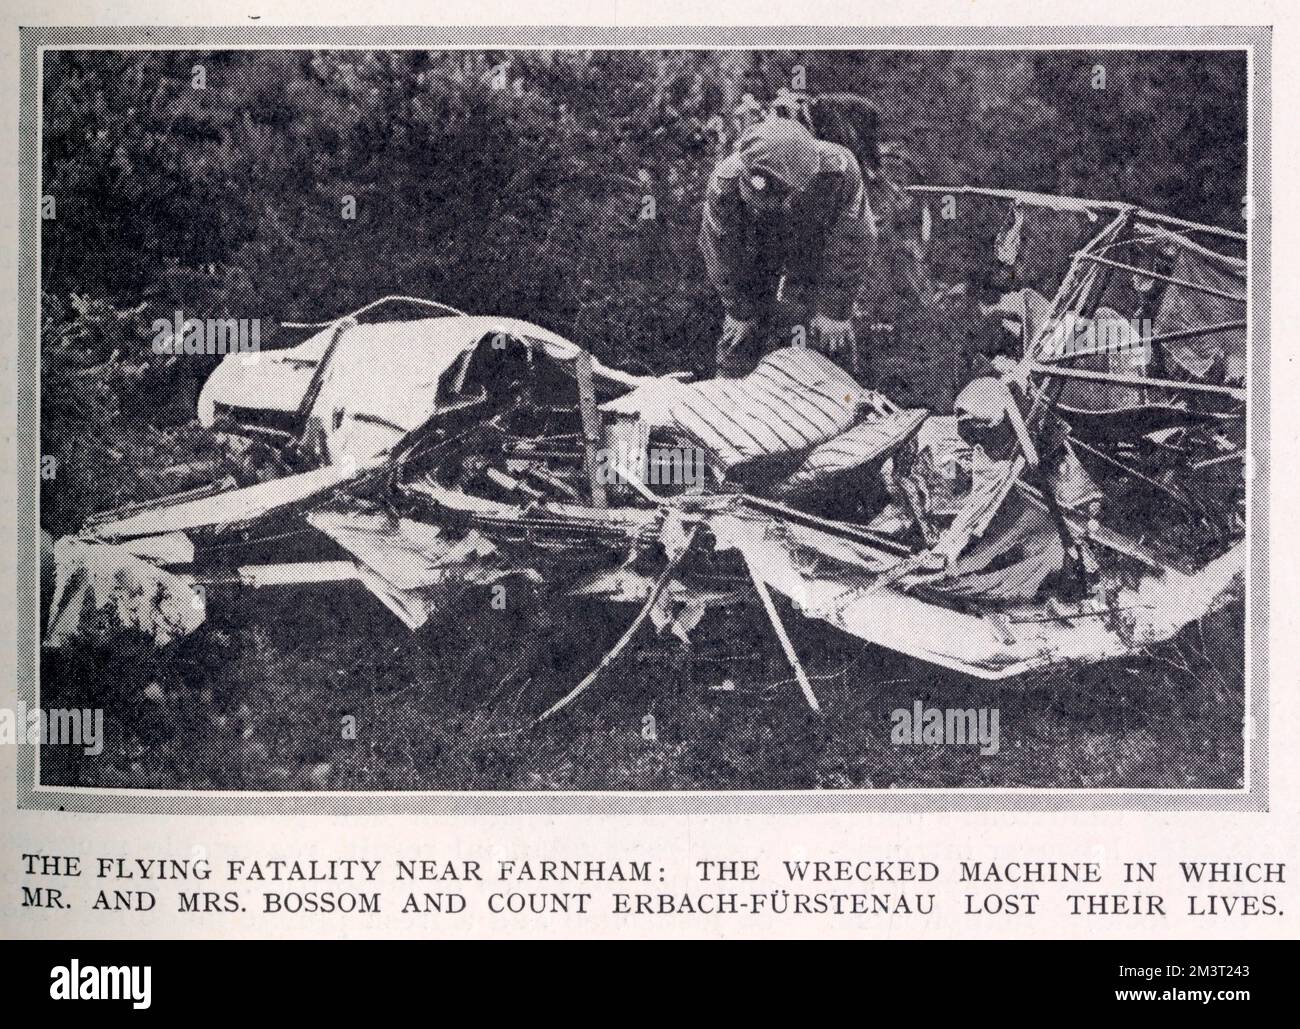 Remains of the de Havilland DH.80 Puss Moth that crashed over Farnham on 27 July 1932, killing Emily Bayne Bossom, her pilot son, Bruce Bayne Bossom, and their friend, Count Otto Erbach Furstenau. Stock Photo